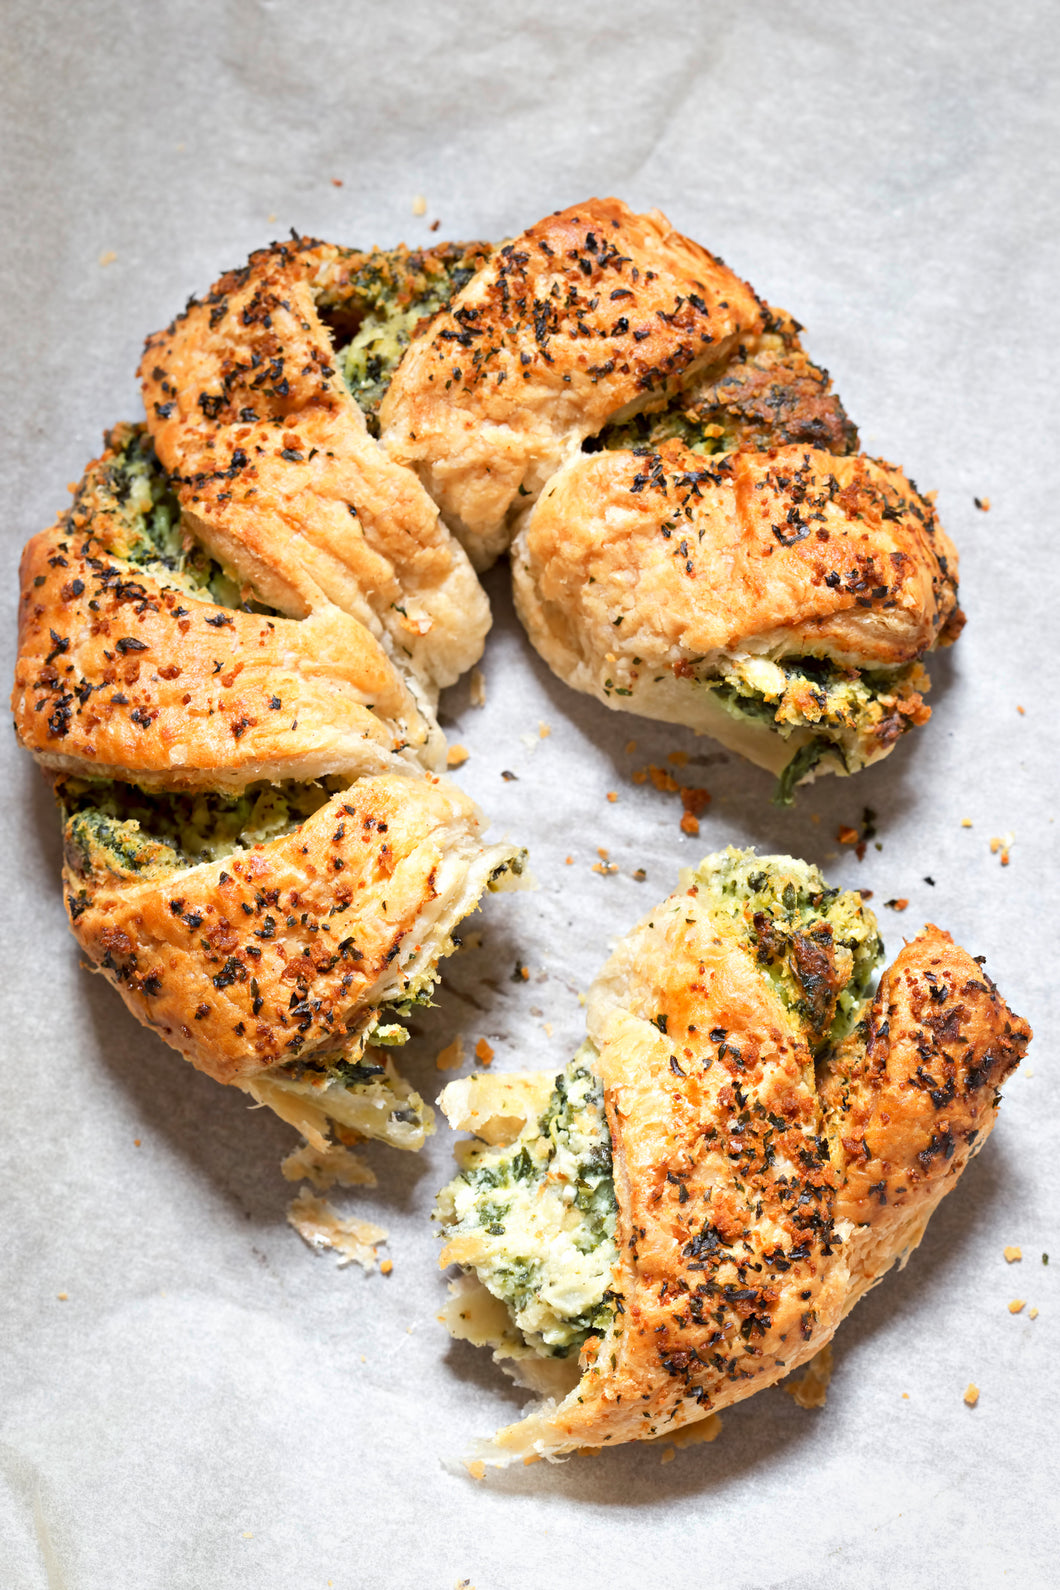 Hands-on Pesto & Cheese Bread and Hot Dog Buns Workshop